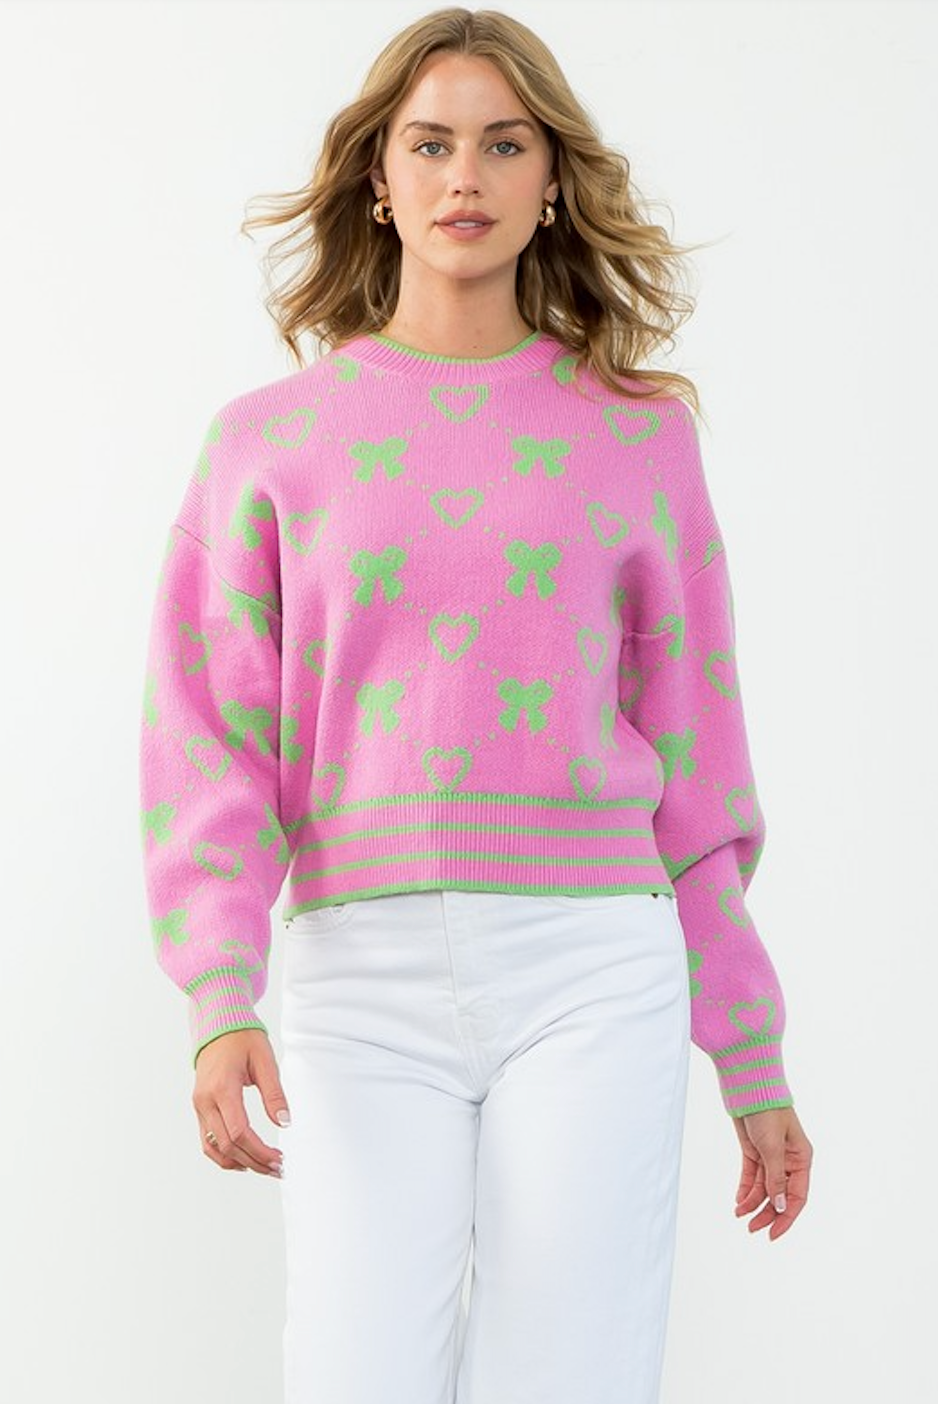 DIXIE RIB KNIT SWEATER IN PINK